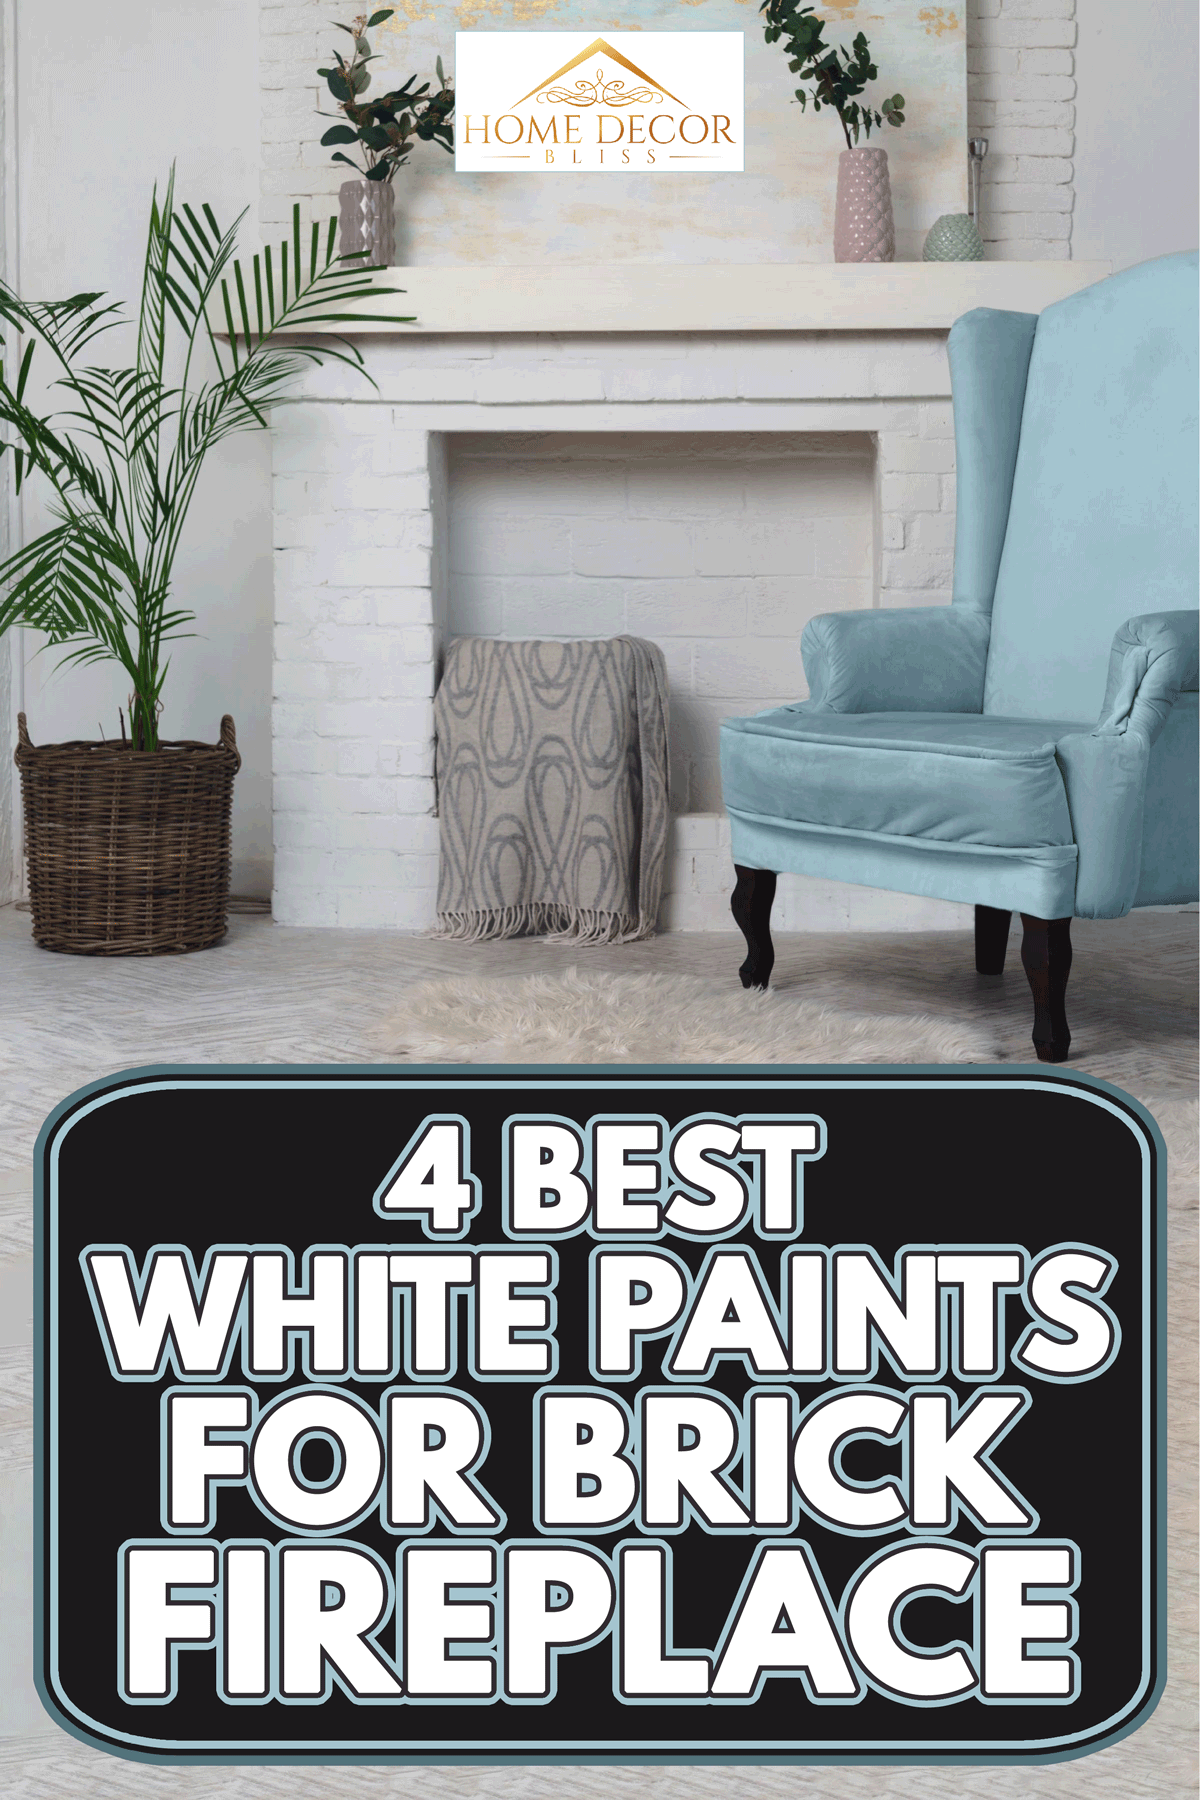 Classical living room with blue armchair and a fireplace, 4 Best White Paints For Brick Fireplace